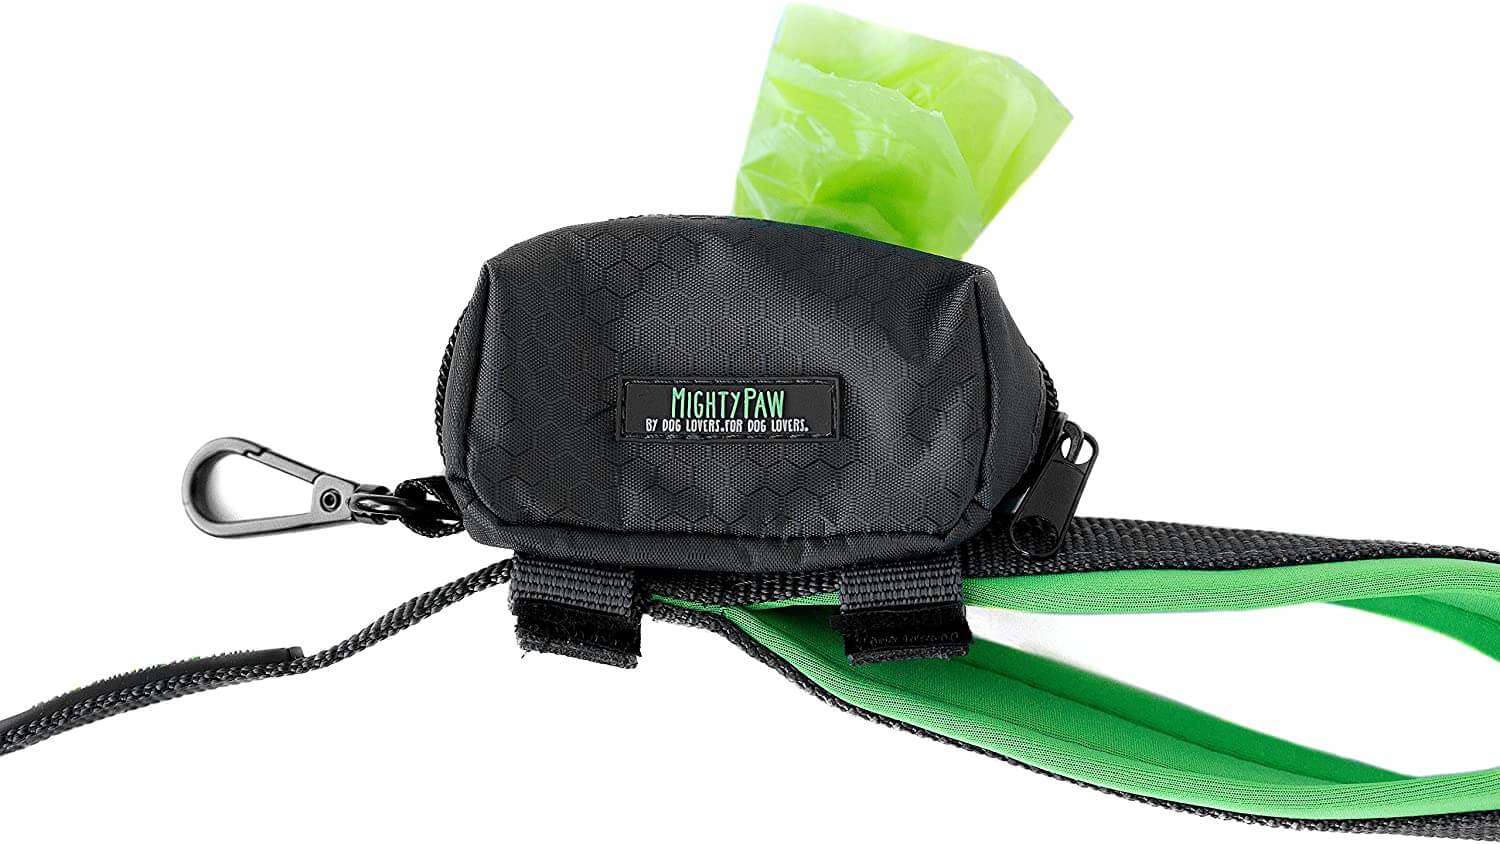 Mighty Paw Weatherproof Poop Bag Holder with Zippered Pouch